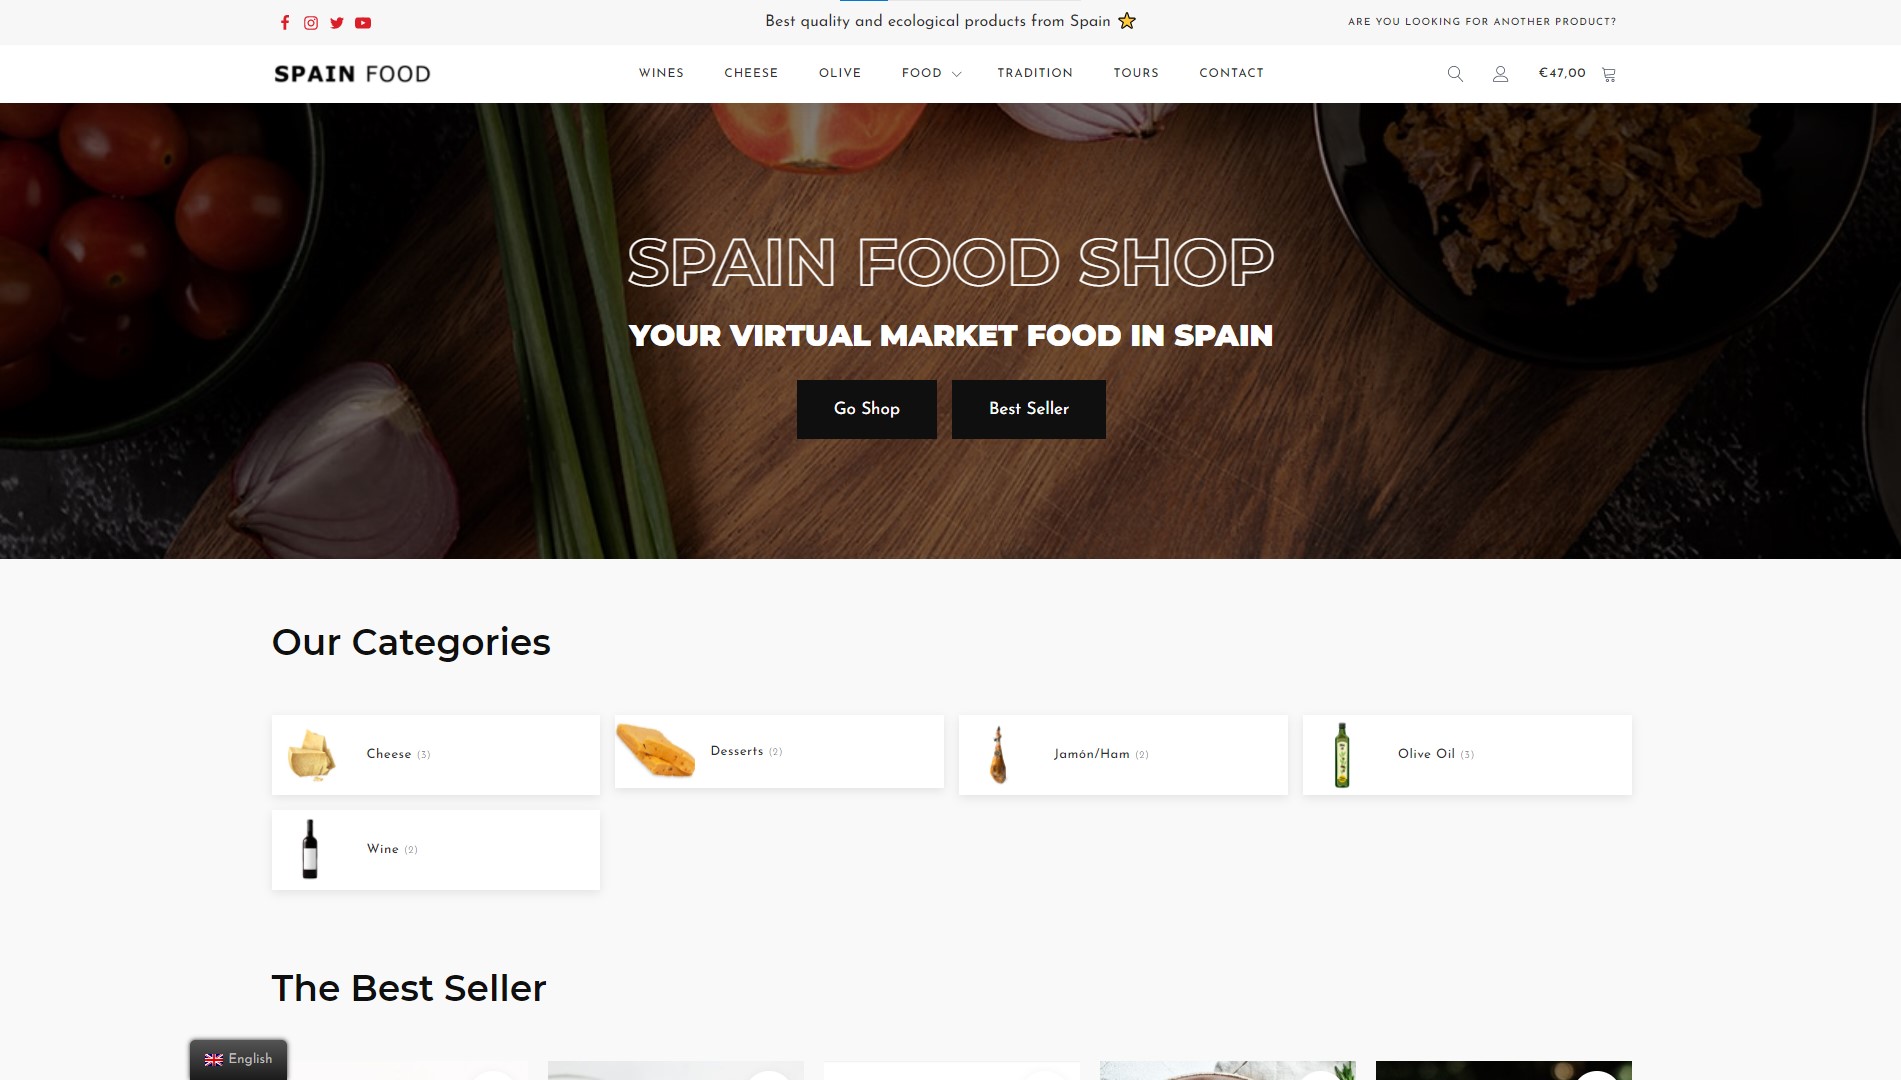 Spain food shop food & drink about page